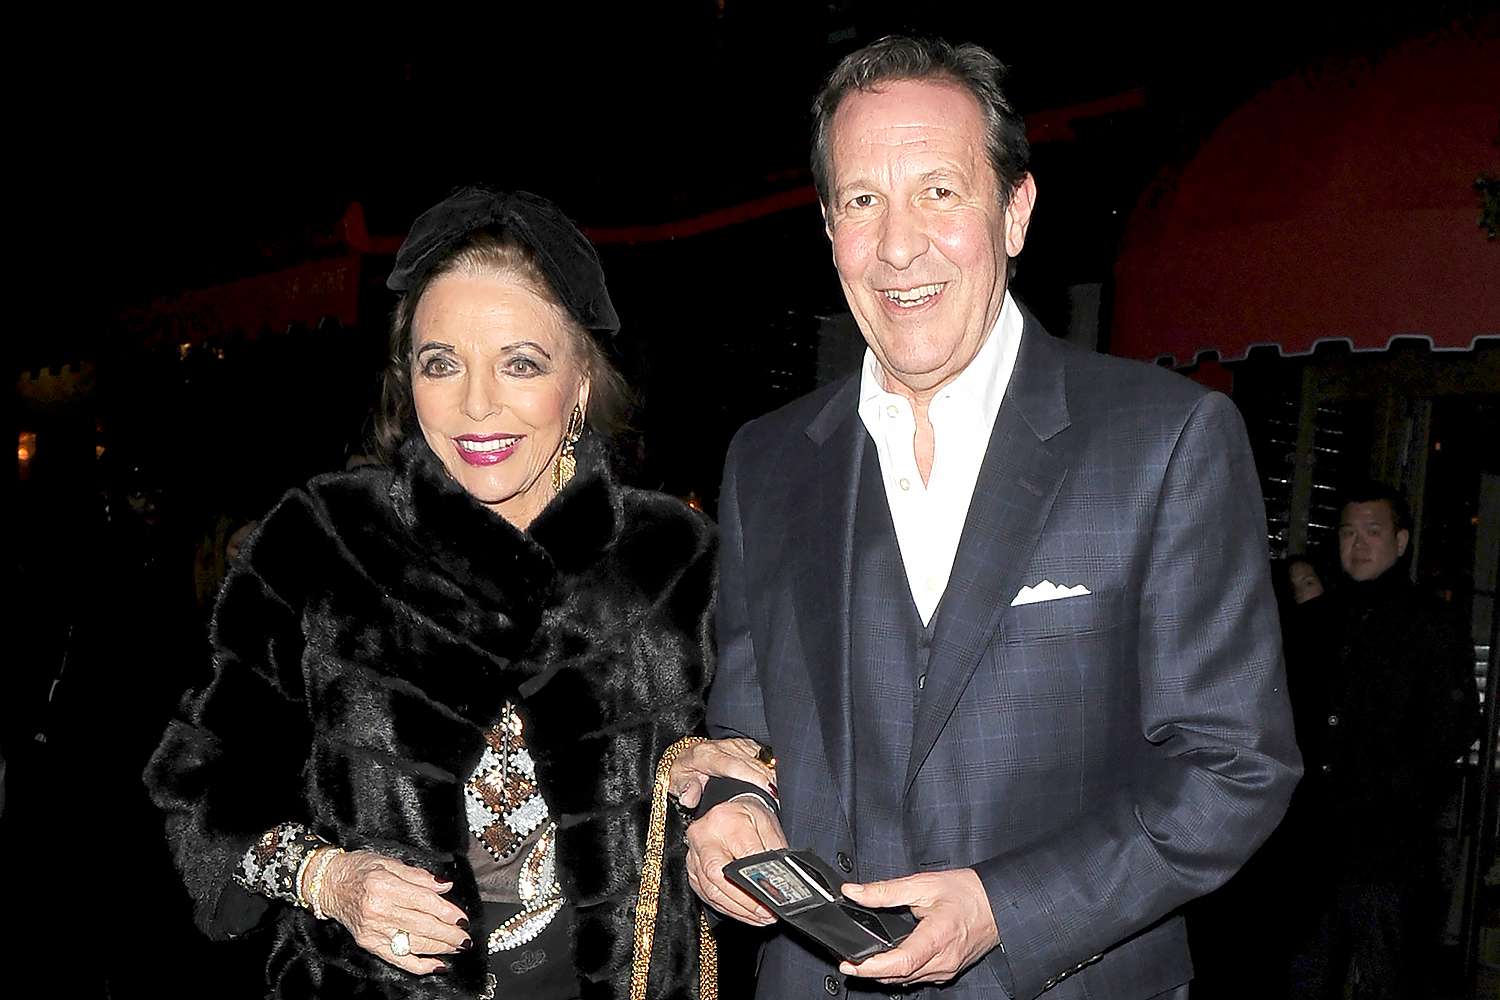 Joan Collins, 90, Wears Sheer, Embellished Top and Oversize Bow for London Date Night with Her Husband Percy Gibson